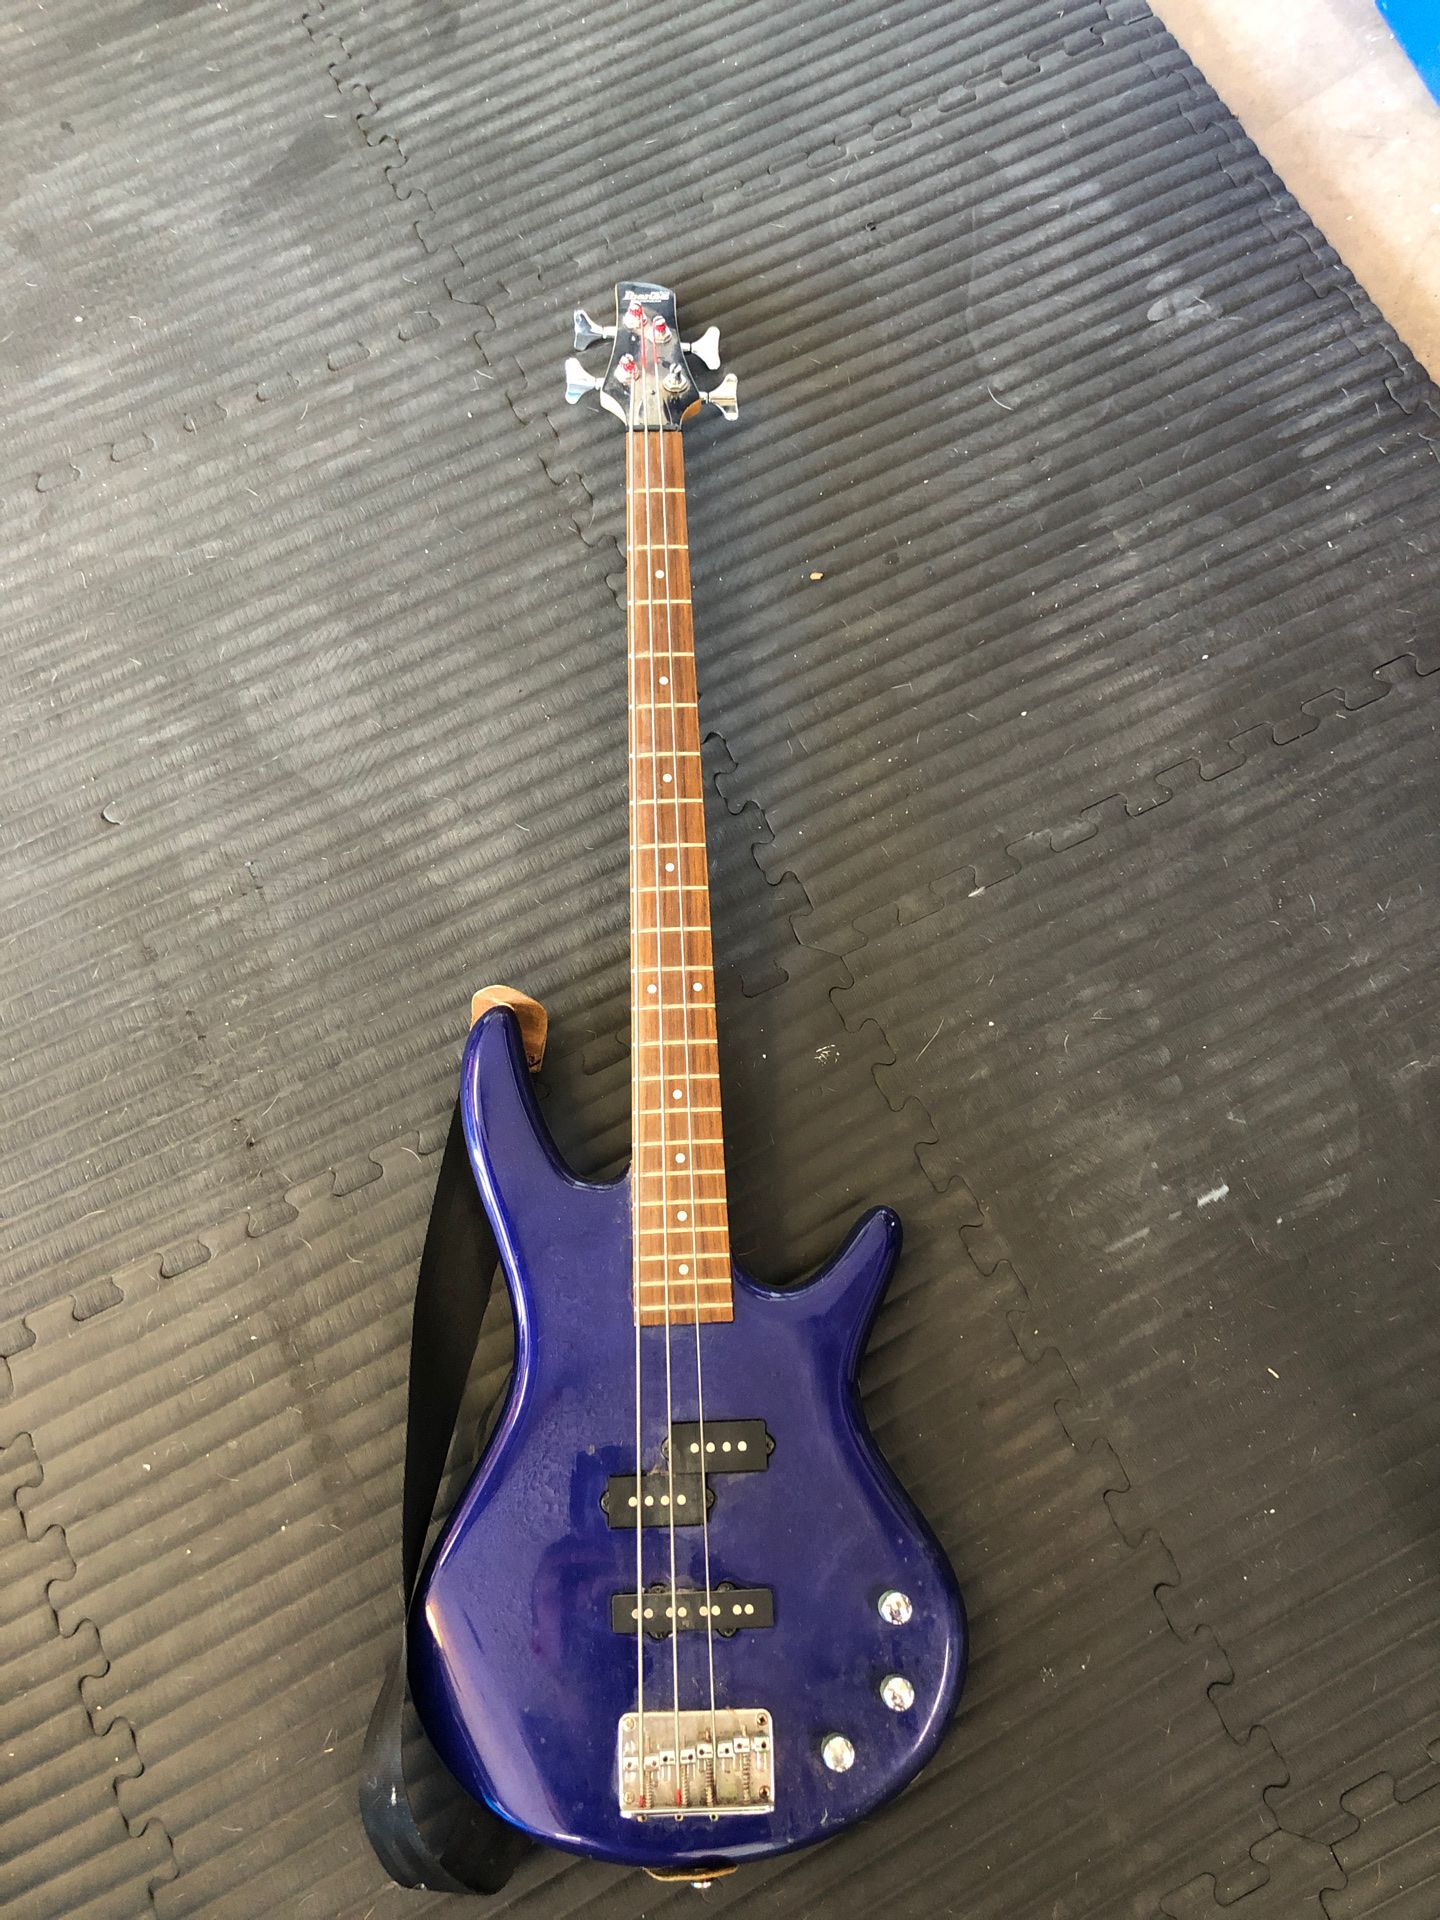 Ibanez bass with amp